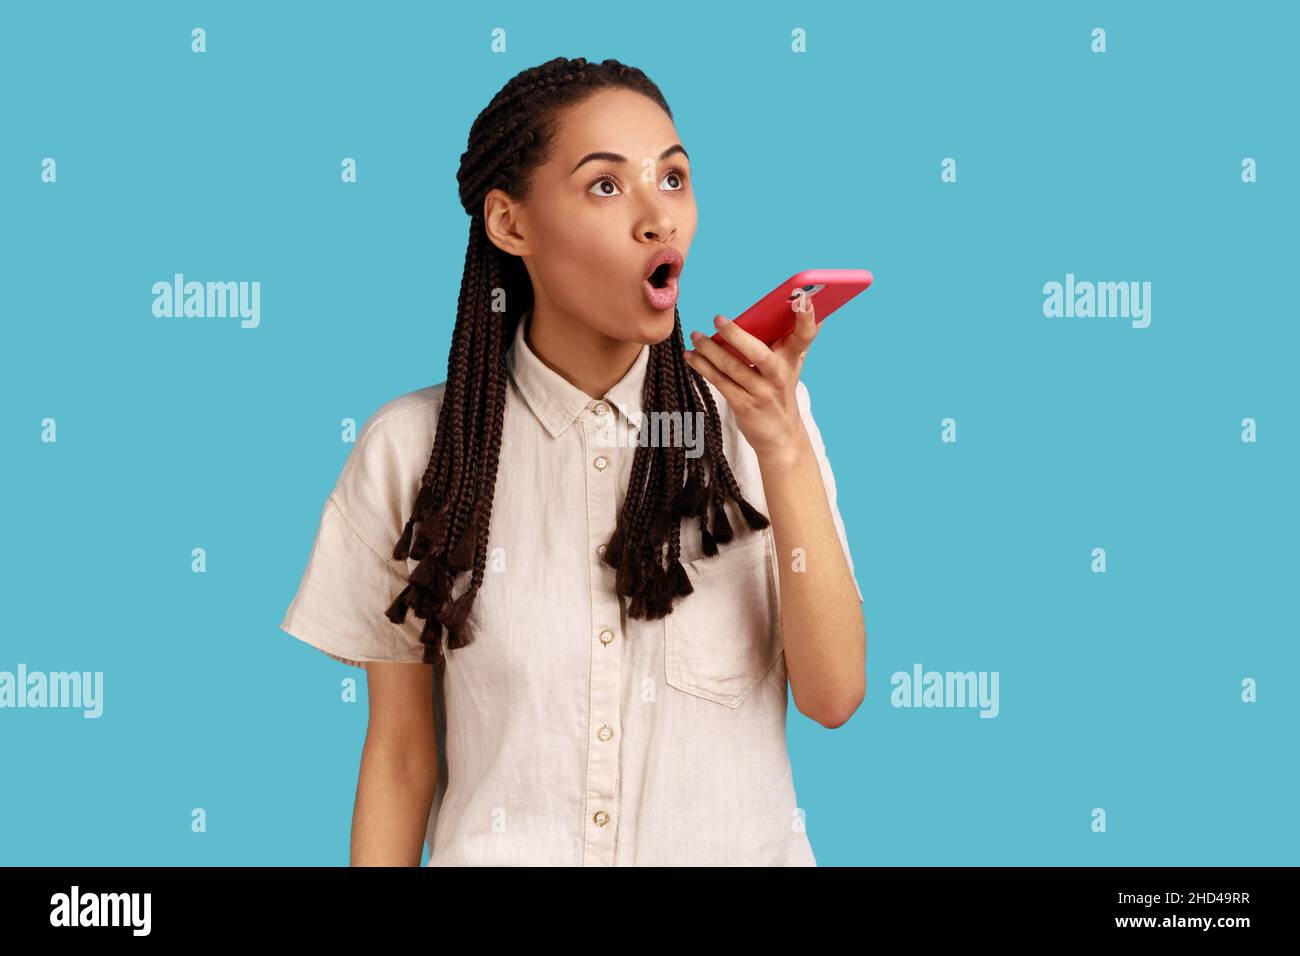 Surprised emotional woman with black dreadlocks uses voice for recognition app on modern cell phone, recording message, wearing white shirt. Indoor studio shot isolated on blue background. Stock Photo